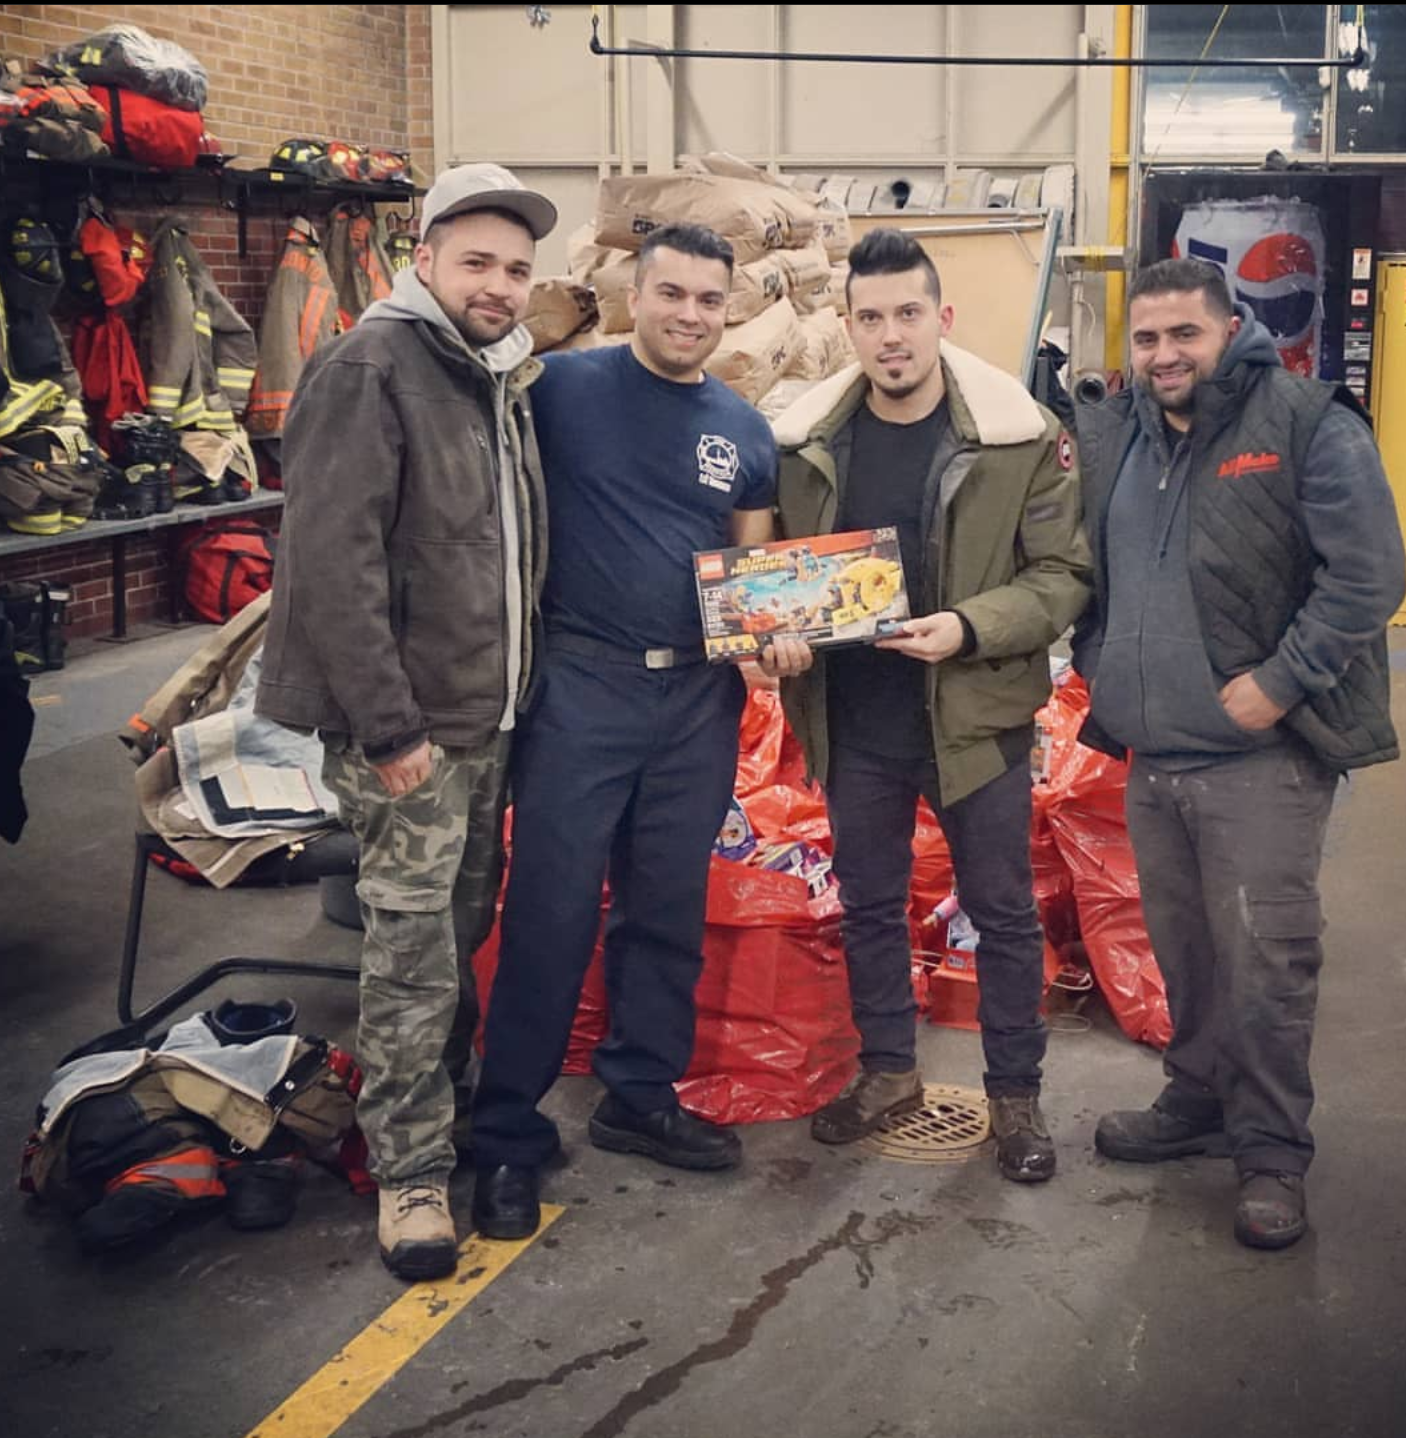 Toronto Firefighter Christmas Toy Drive - Fade Room donates to children